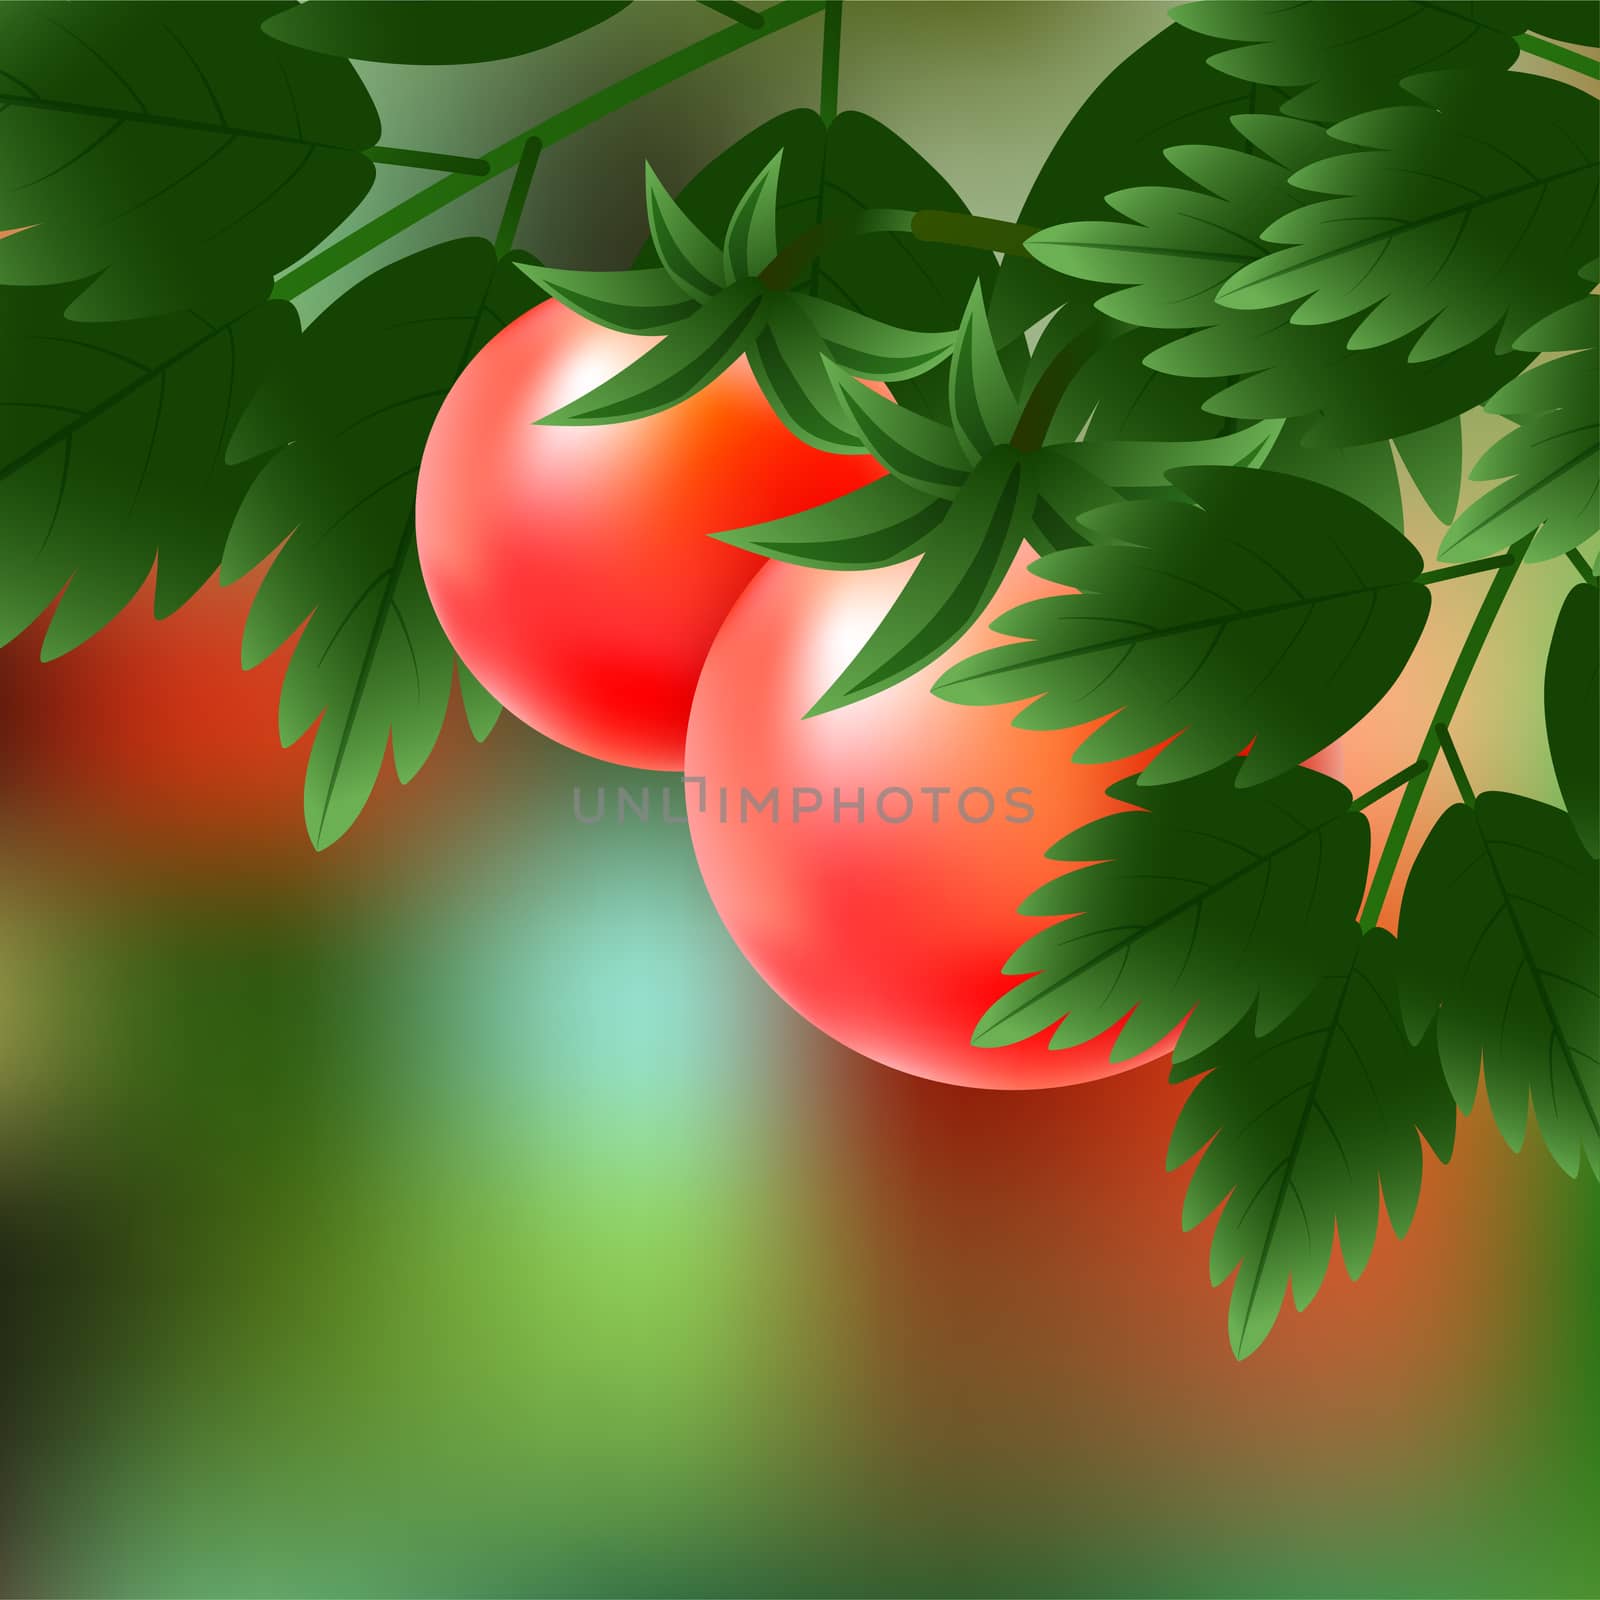 Red, juicy, ripe tomatoes growing on the green branch. illustration